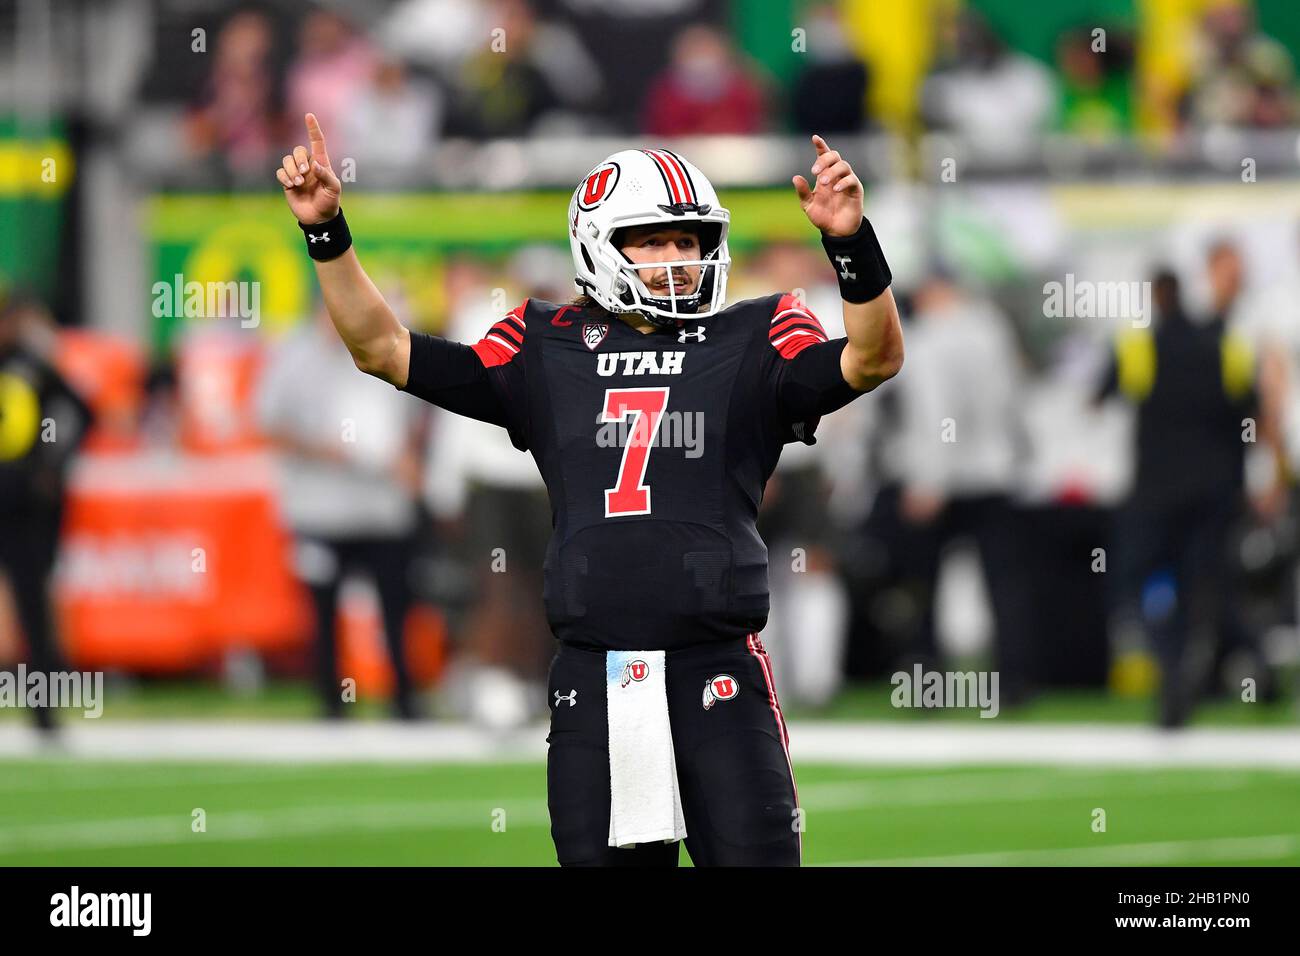 Utah Utes quarterback Cameron Rising (7) celebrates after completing the play at the Pac-12 Championship Game between Oregon Ducks and Utah Utes on De Stock Photo